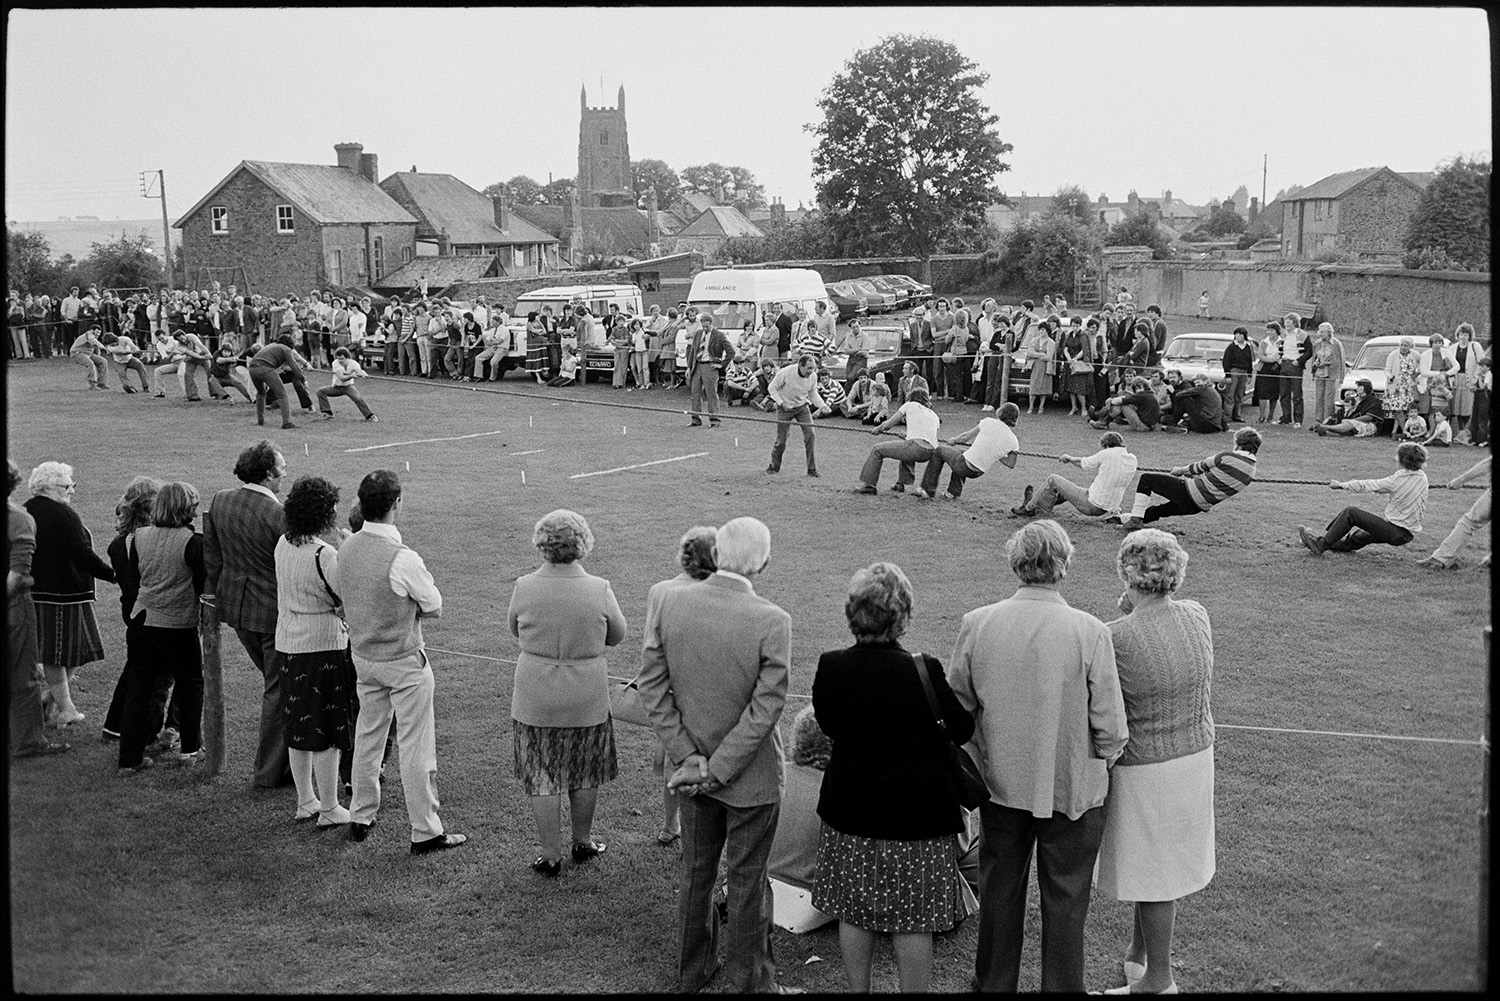 Tug o war in park, spectators. 
[People watching a tug of war match in a park at Chulmleigh Fair. Chulmleigh church tower can be seen in the background.]